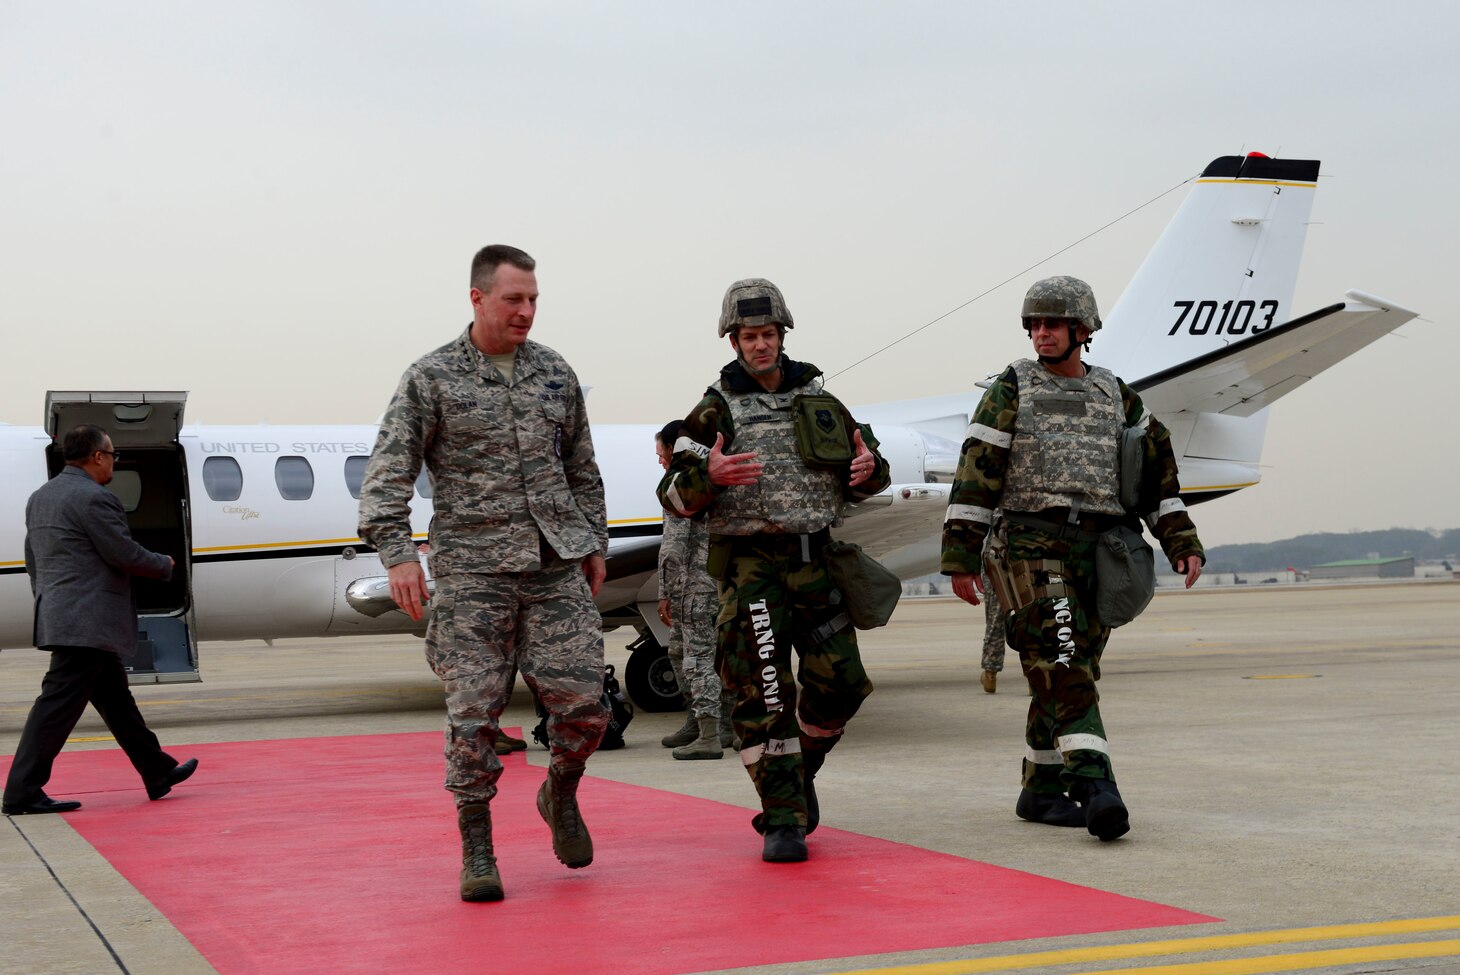 Lt. Gen. John Dolan, U.S. Forces Japan and 5th Air Force commander, meets with Col. Andrew Hansen, 51st Fighter Wing commander and Chief Master Sgt. Alex Del Valle, 51st FW command chief, at Osan Air Base, Republic of Korea, March 7, 2016. Dolan is visiting Osan AB to observe key components of Exercise Key Resolve, to include command and control procedures, the air tasking order coordination process, and the quality of training provided to Air Force personnel. (U.S. Air Force photo by Staff Sgt. Jonathan Steffen/Released)